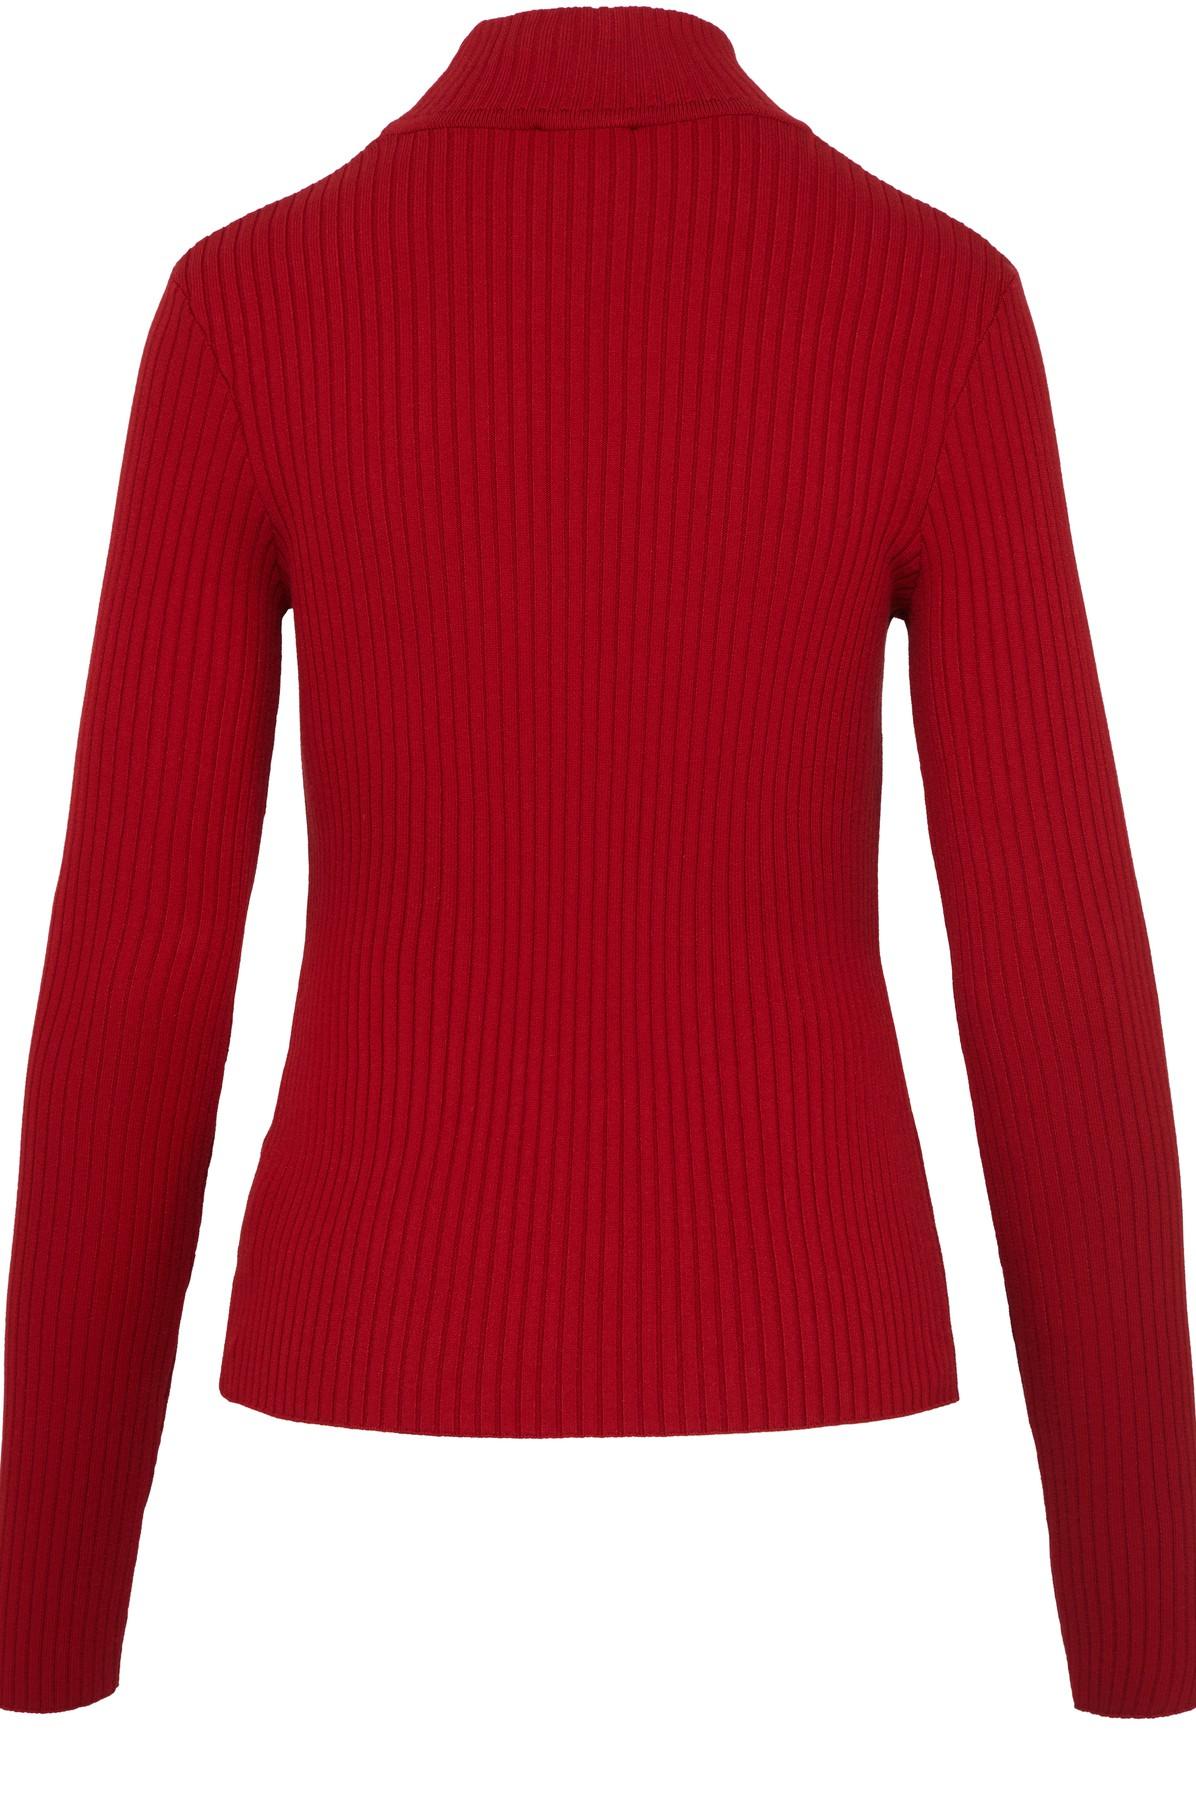 Courreges Reedition High Collar Jumper in Red | Lyst